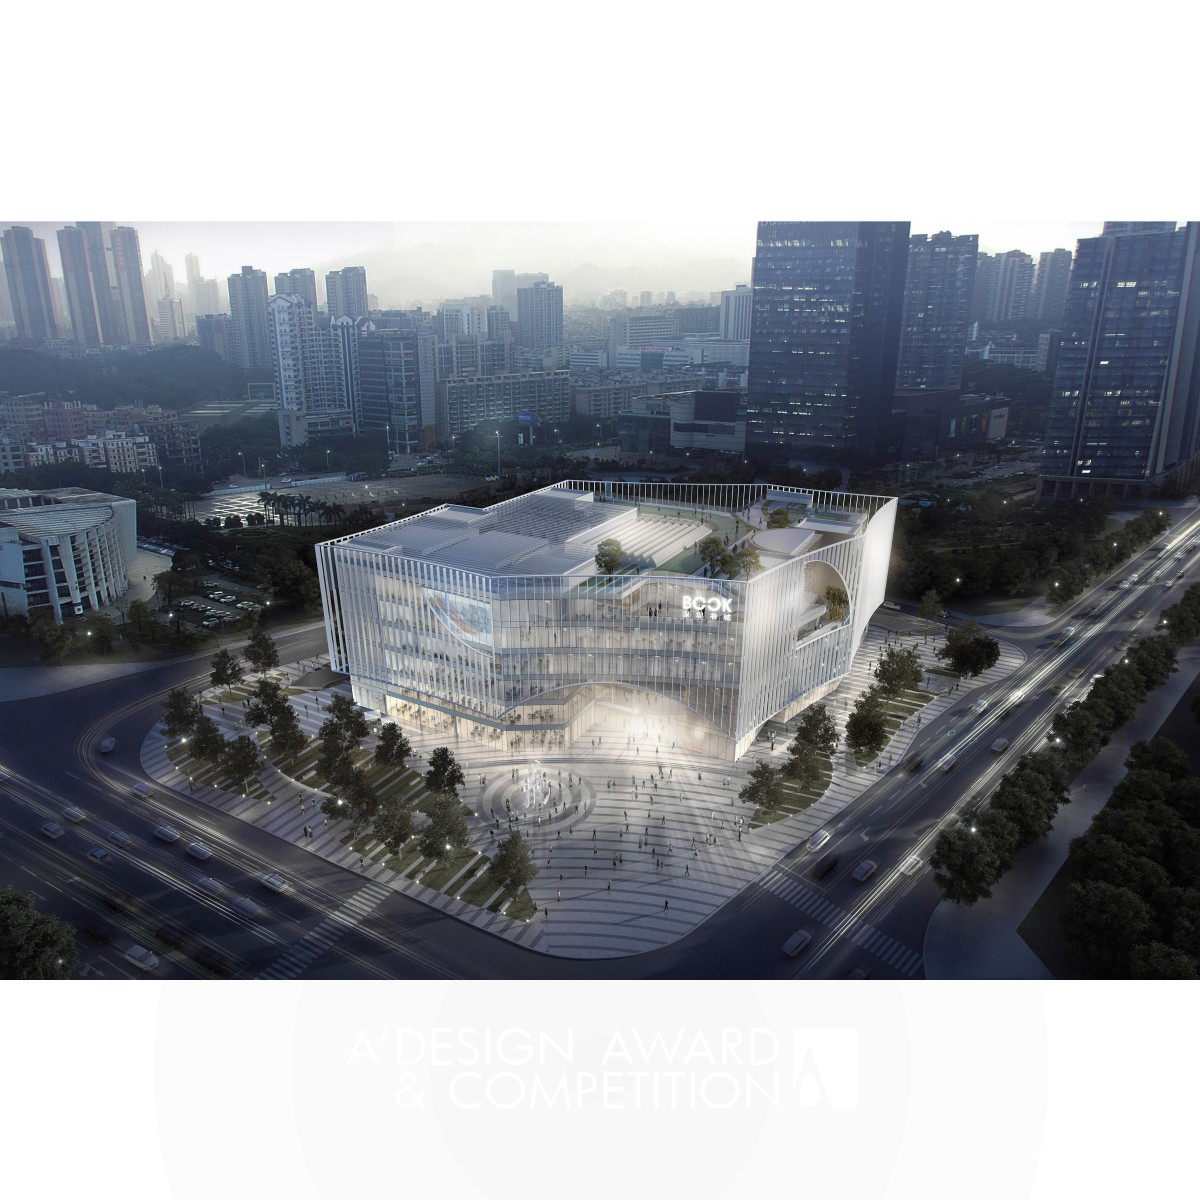 Shenzhen Book City <b>Cultural space and library